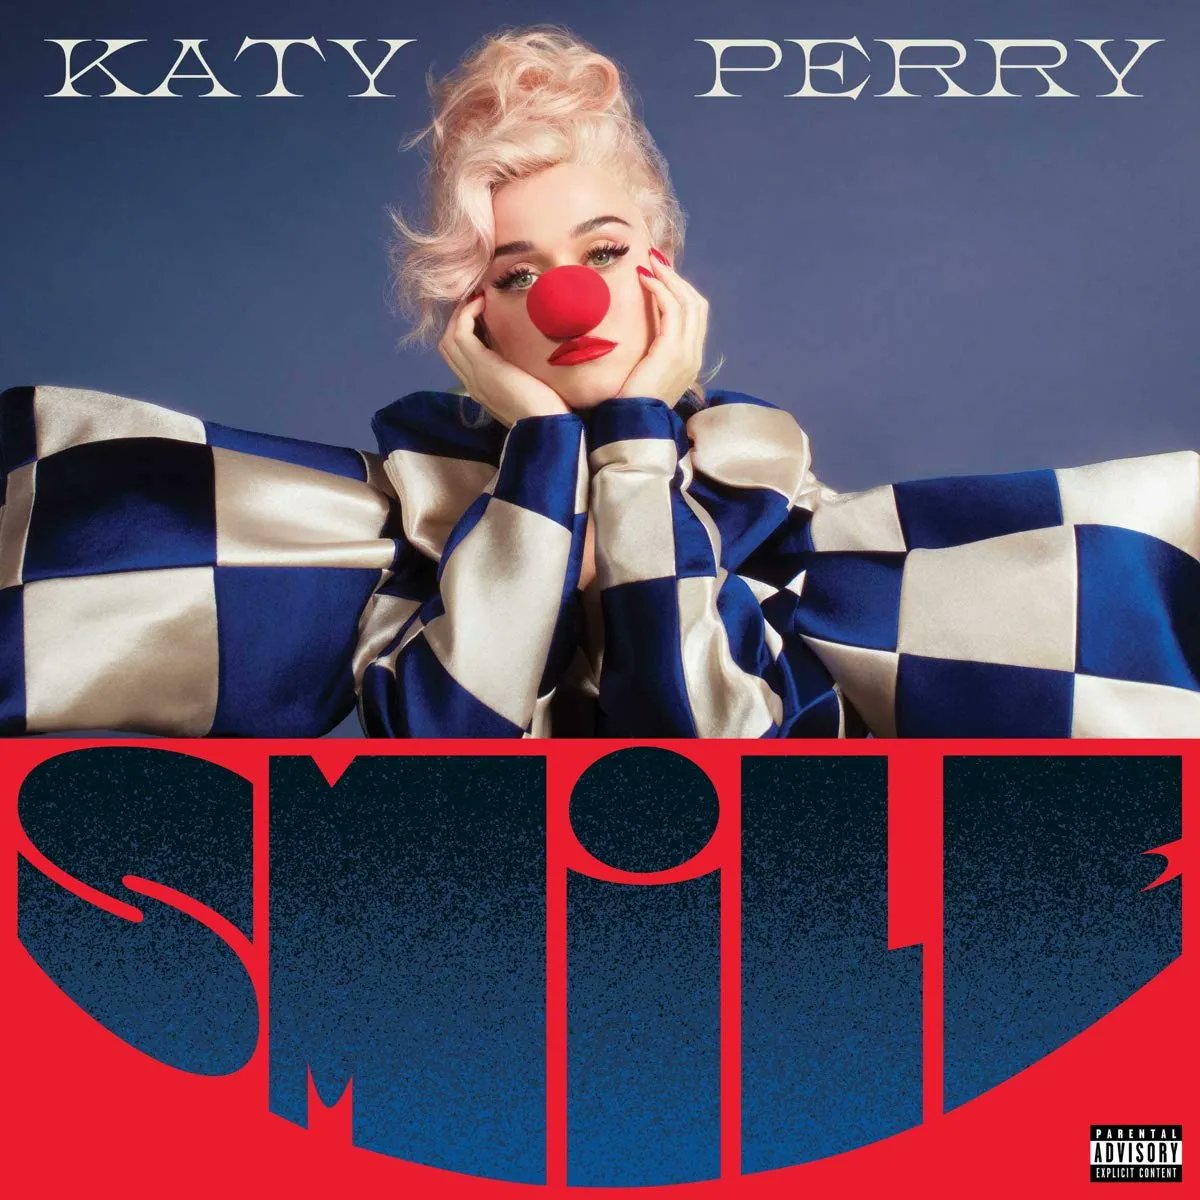 25. Smile - Katy Perry.PRISM is still her best album in my opinion, but this one comes pretty close too. We were given total pop perfection and we needed it at the time of release too. Best tracks:SmileNever Really OverTuckedChampagne Problems @katyperry